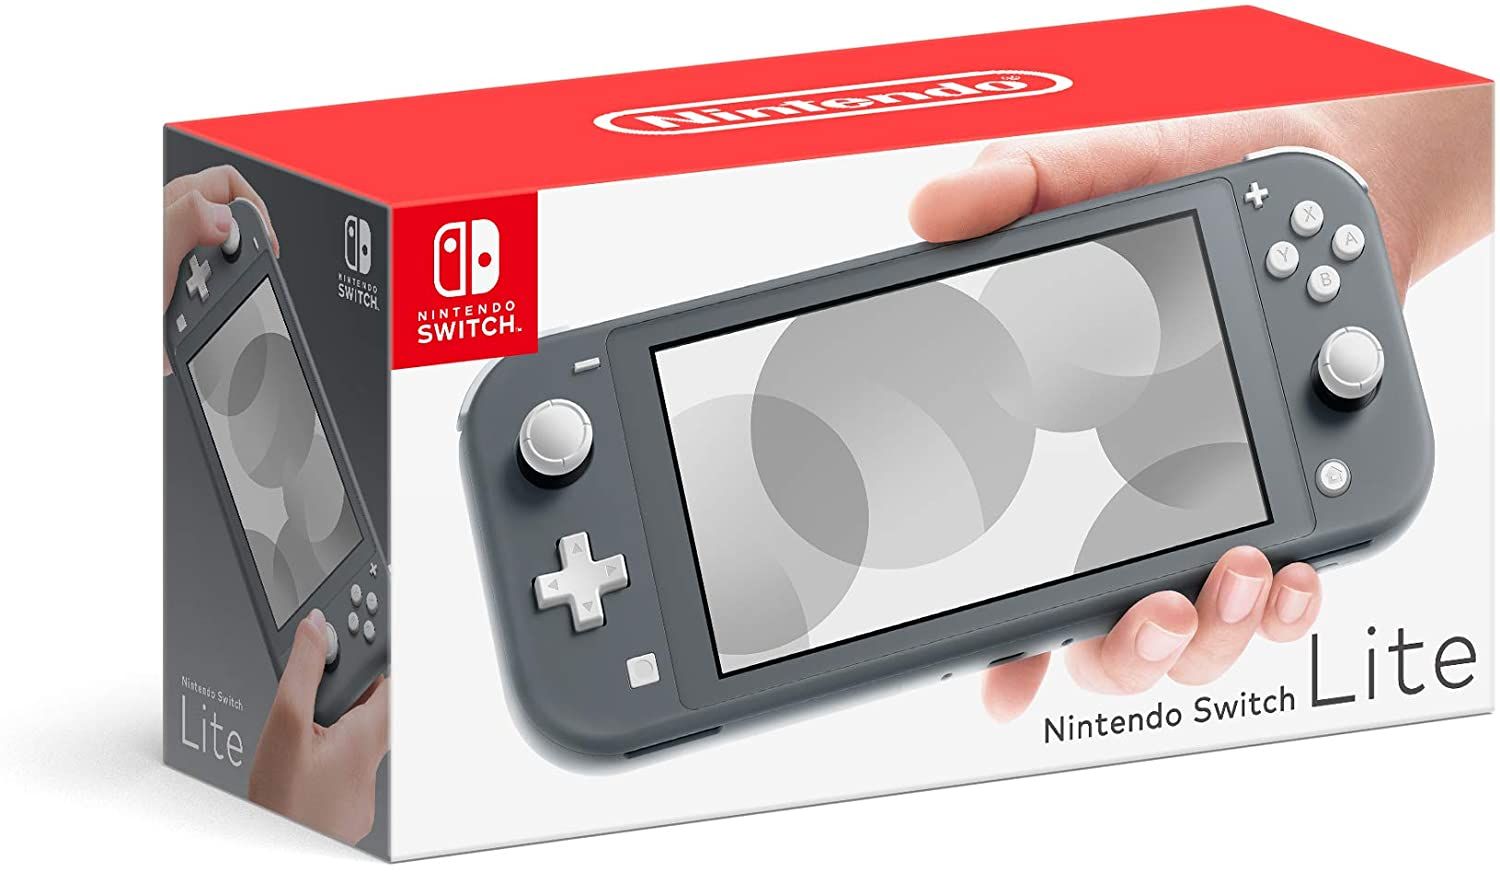 Box art for a gray-colored Nintendo Switch Lite